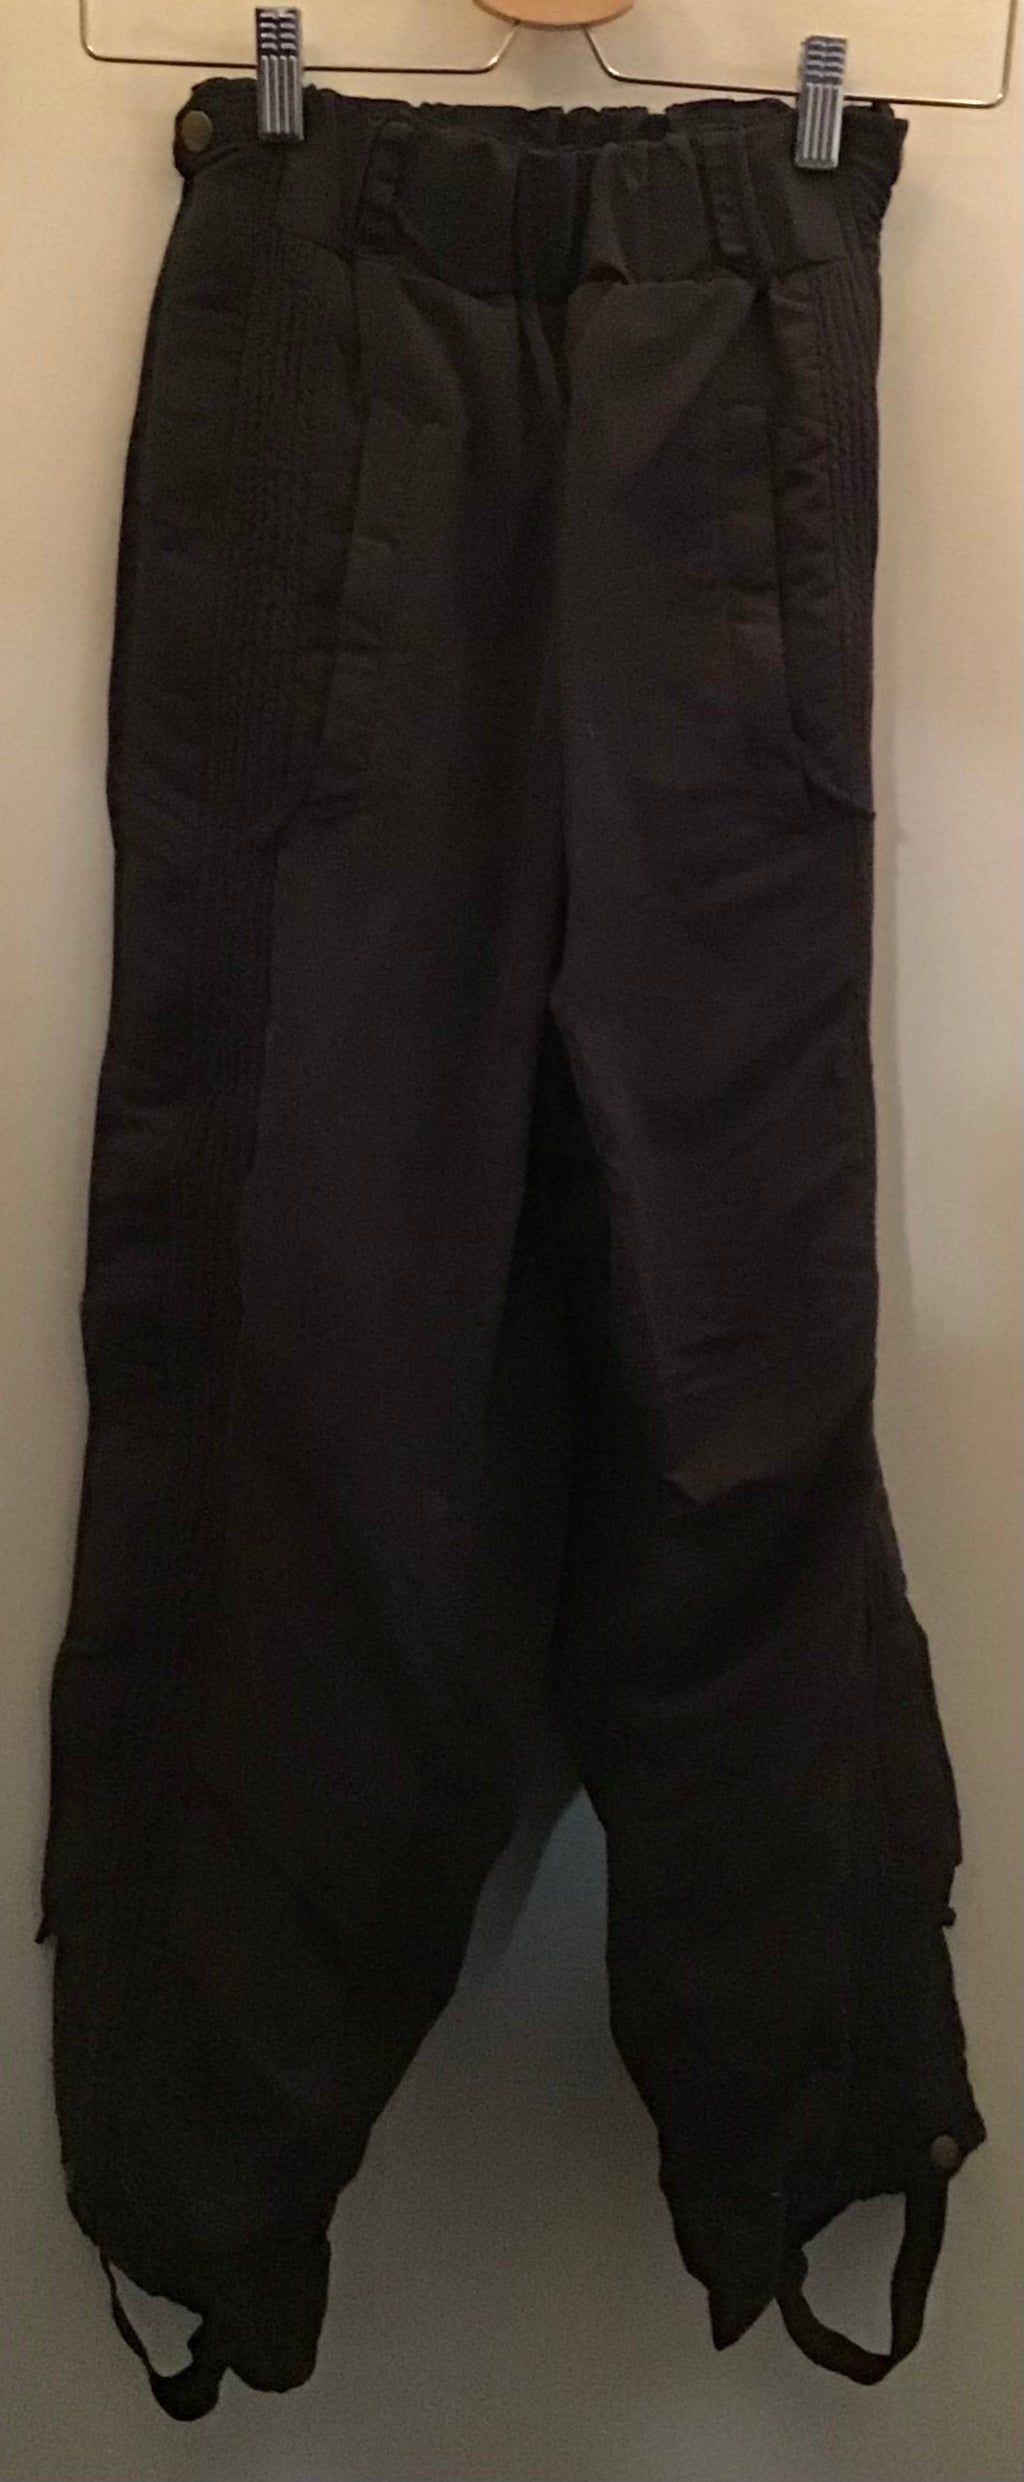 Youth winter overpant